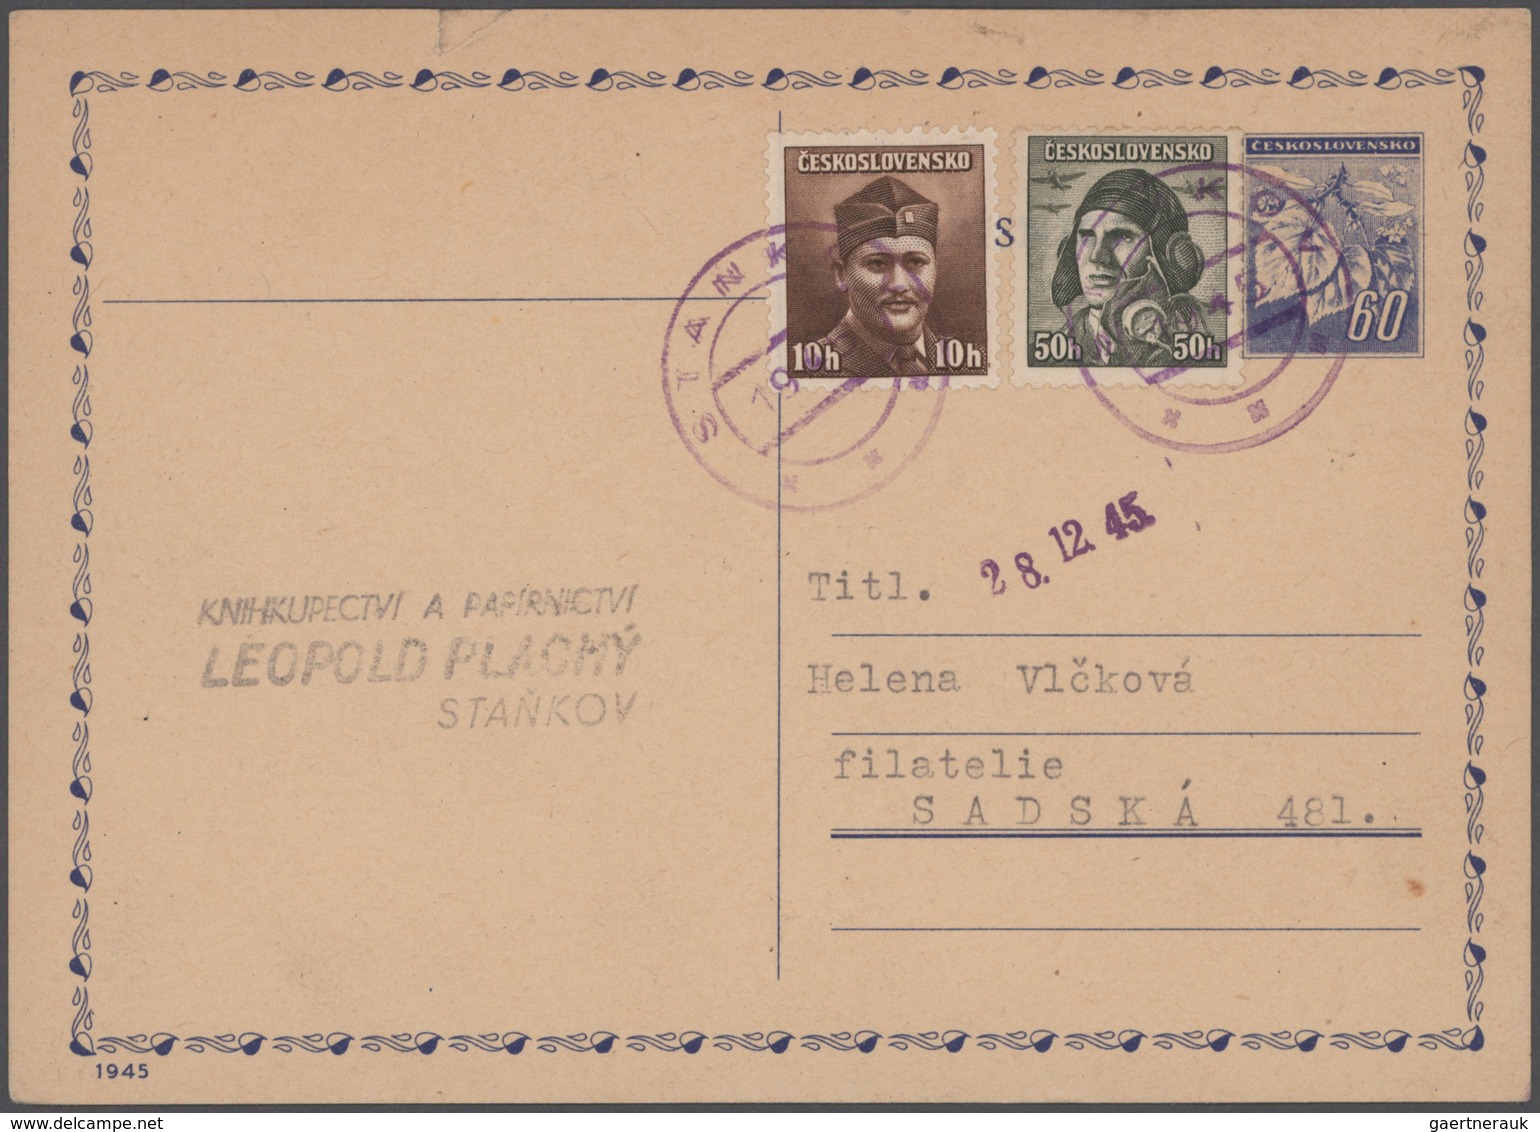 Tschechoslowakei - Stempel: 1945/1947, Transition period, collection of apprx. 265 (almost exclusive